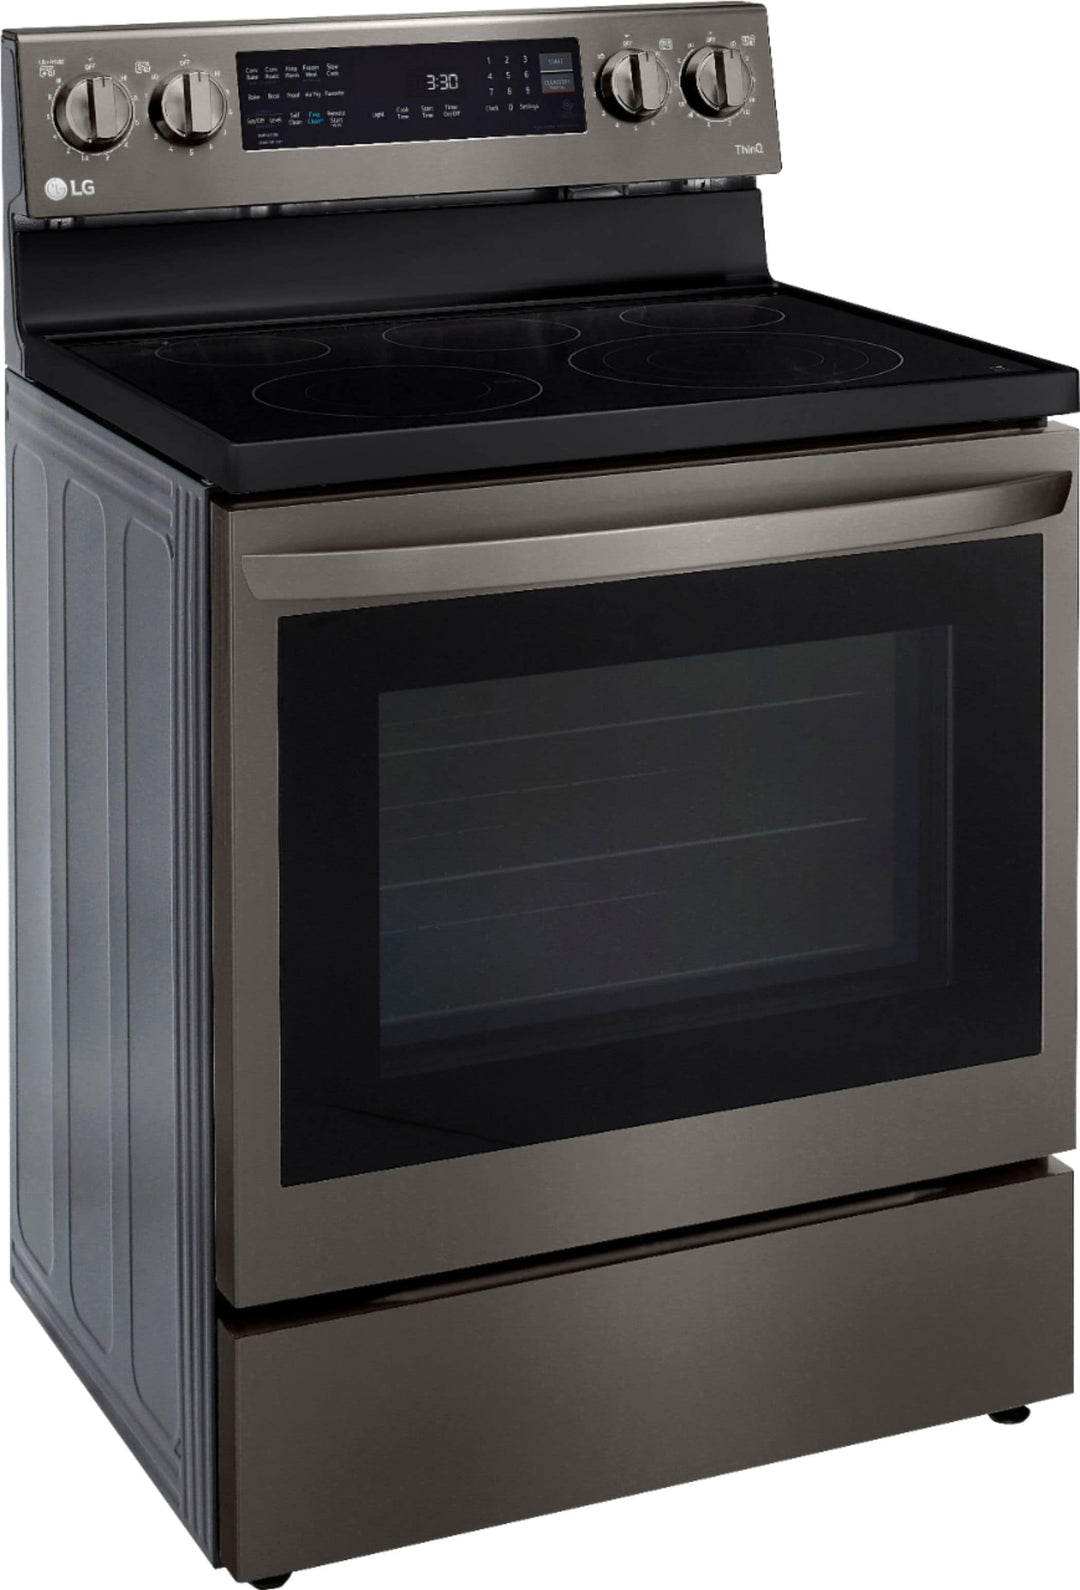 LG - 6.3 Cu. Ft. Smart Freestanding Electric Convection Range with EasyClean, Air Fry and InstaView - Black stainless steel_12